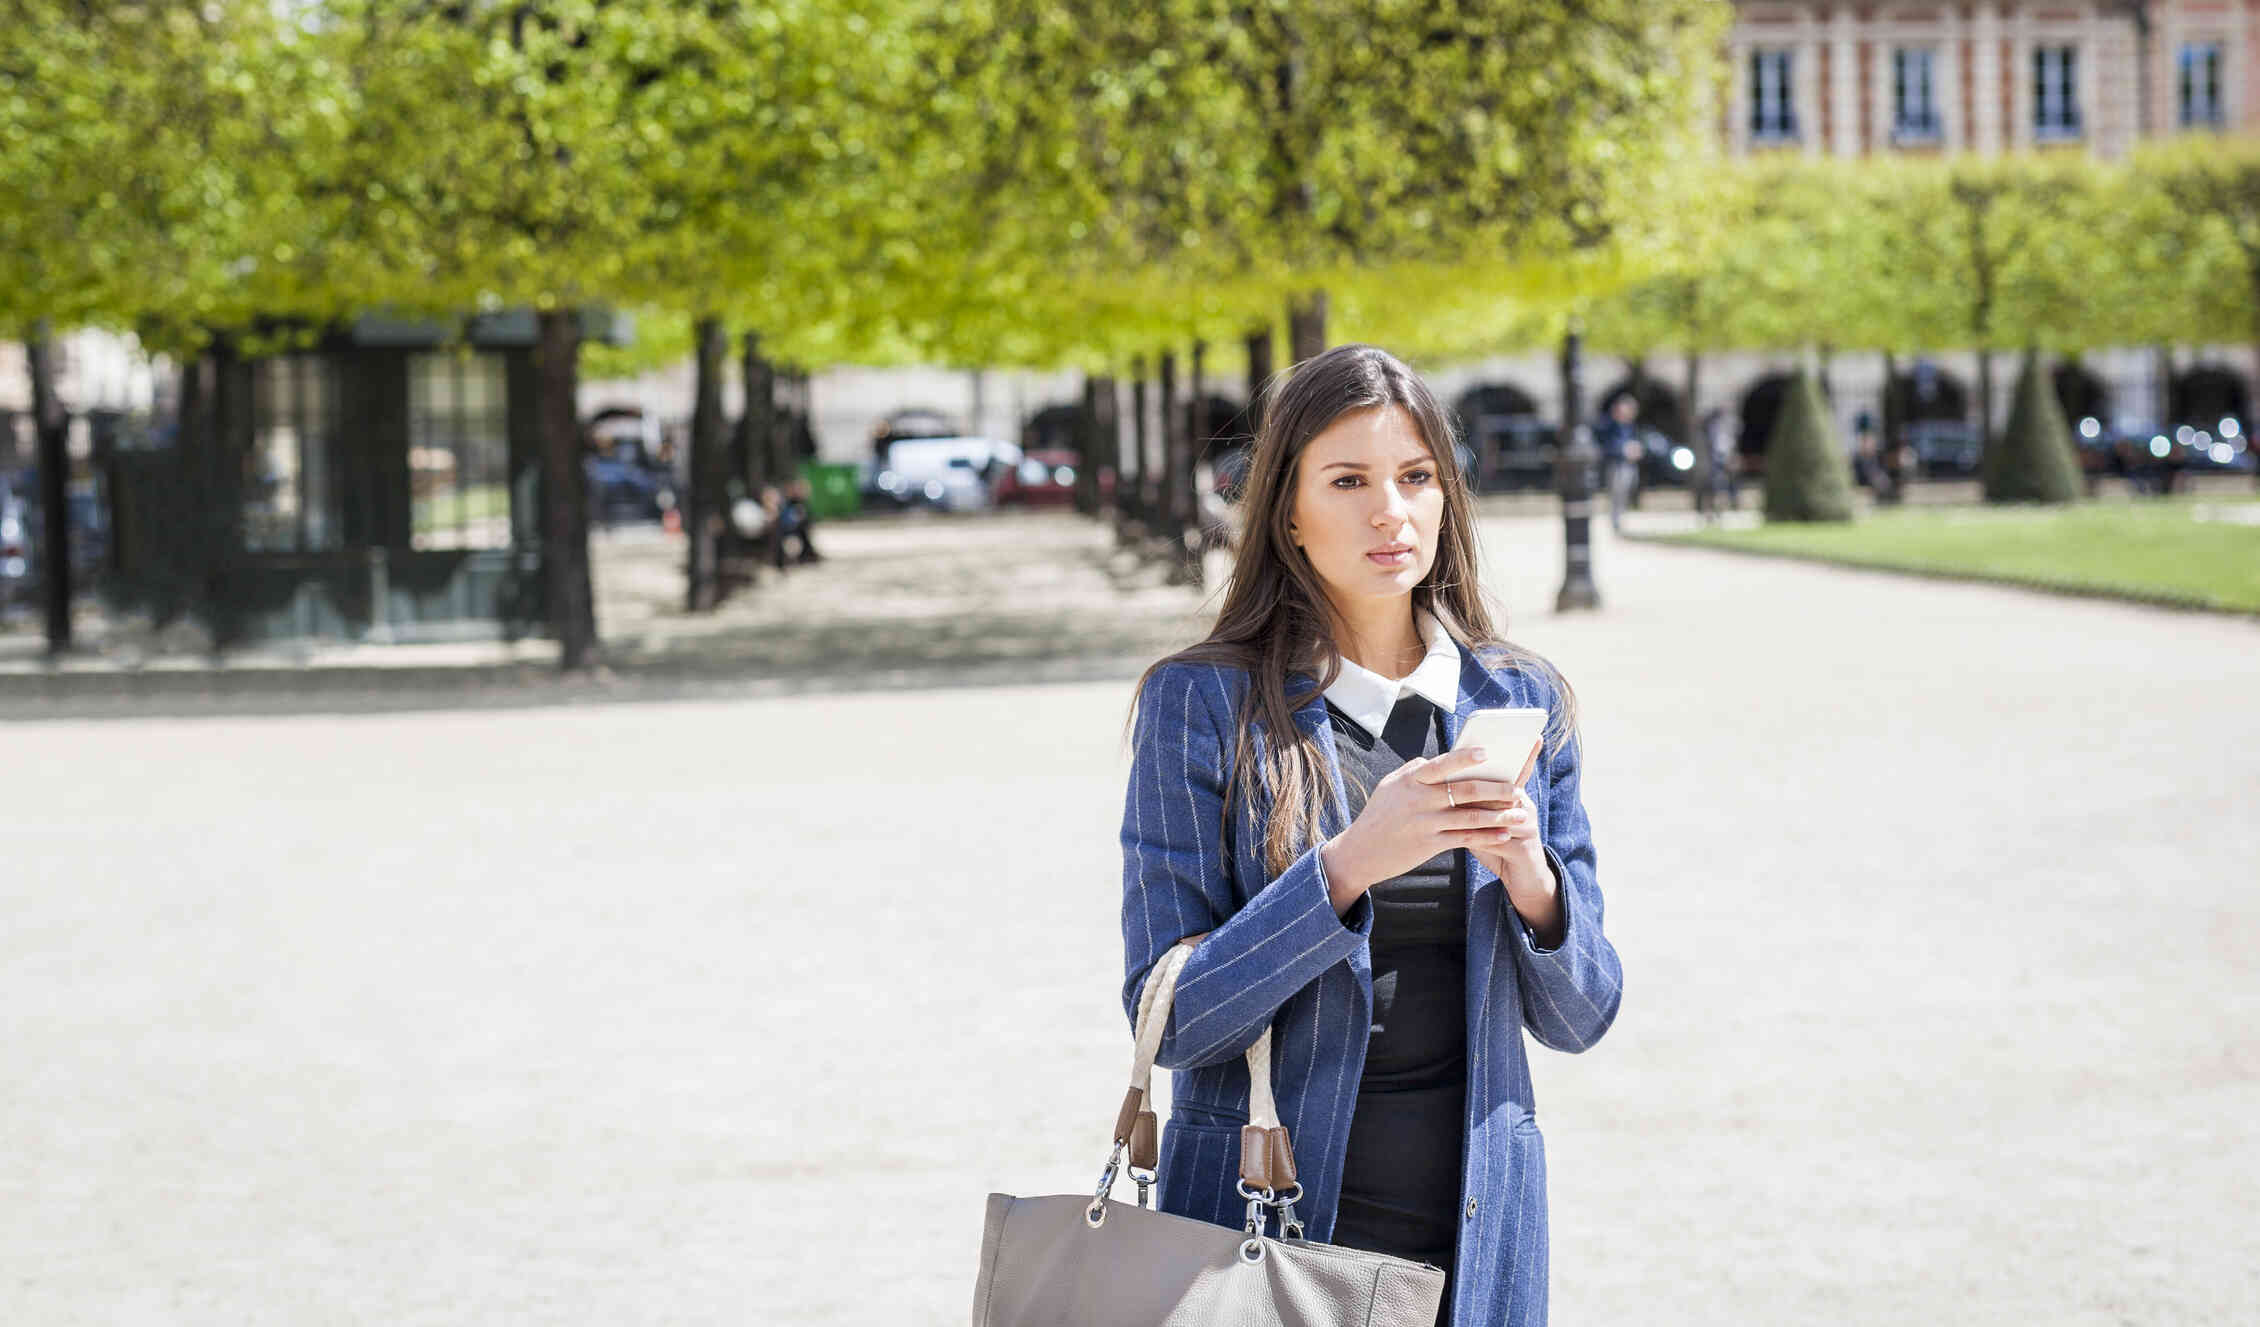 A woman in a blue coat walks outside on a very sunny day while carrying her large purse and holding her cellphone in her hands.